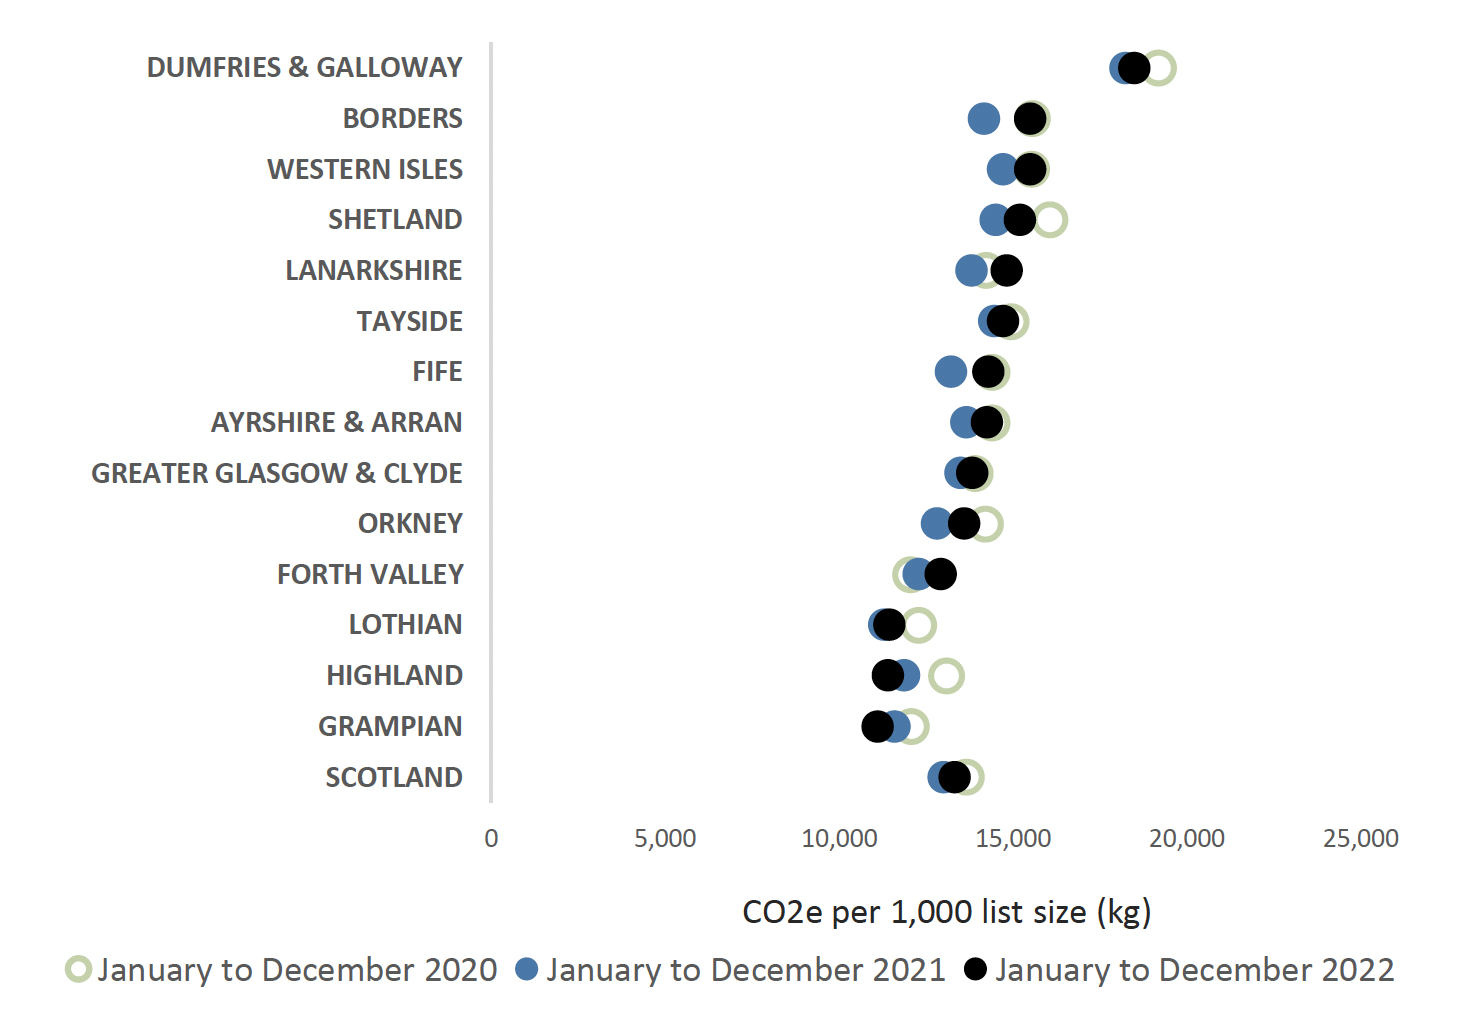 Chart showing variance in carbon emissions across all health boards and Scotland from 2020 to 2022 indicating target reductions for net zero. Overall Scotland trend is fairly static